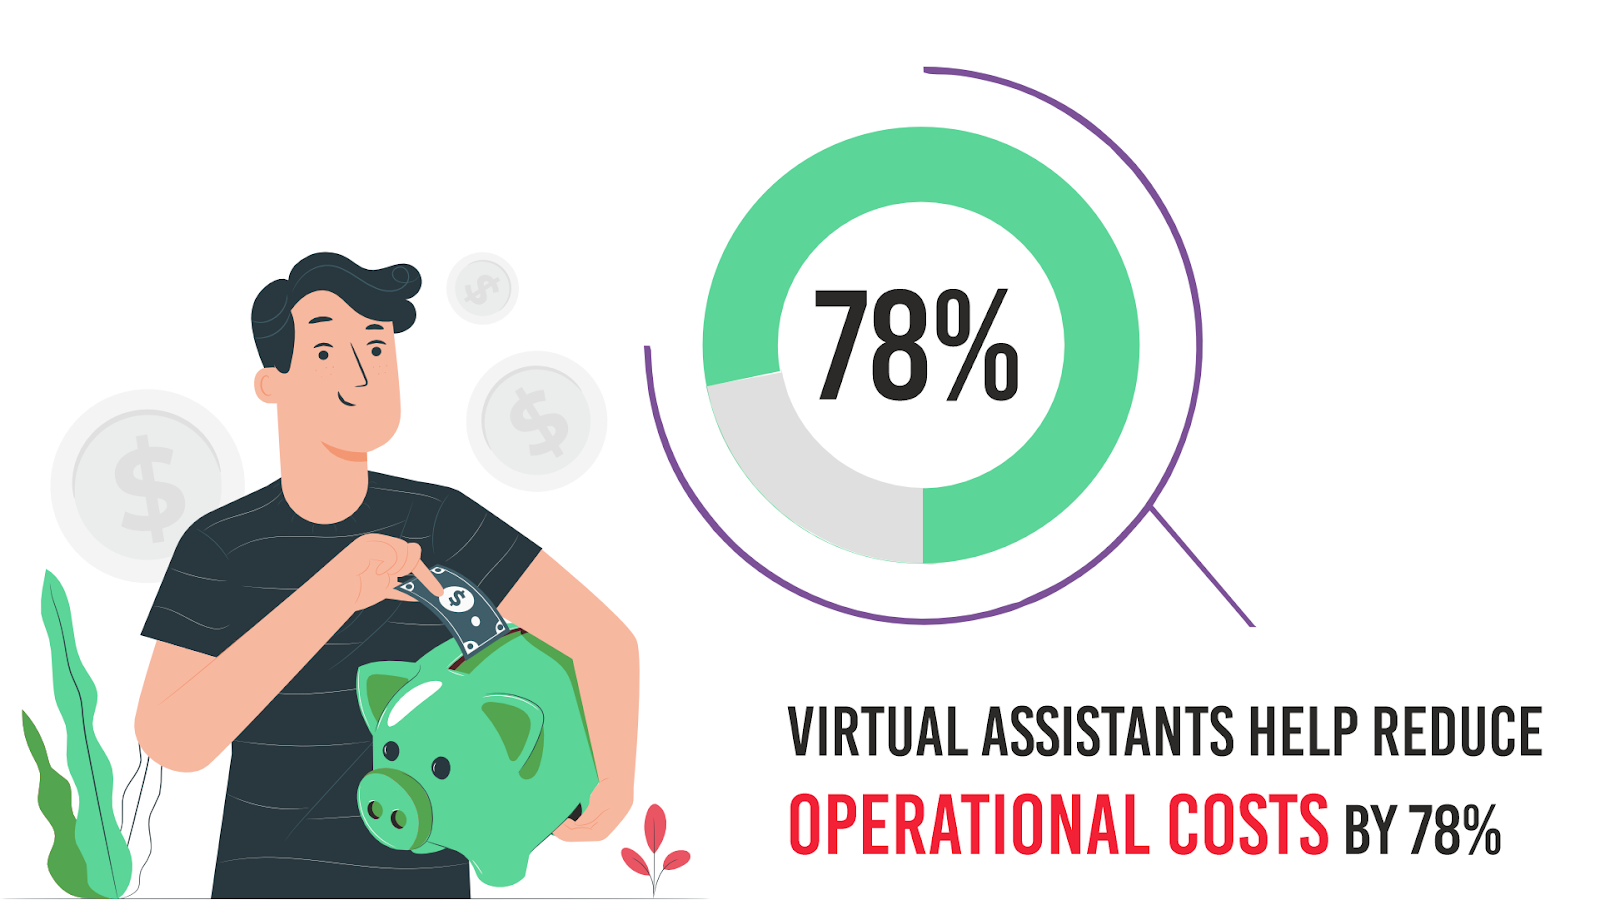 Infographic showing virtual assistants help reduce costs by 78%